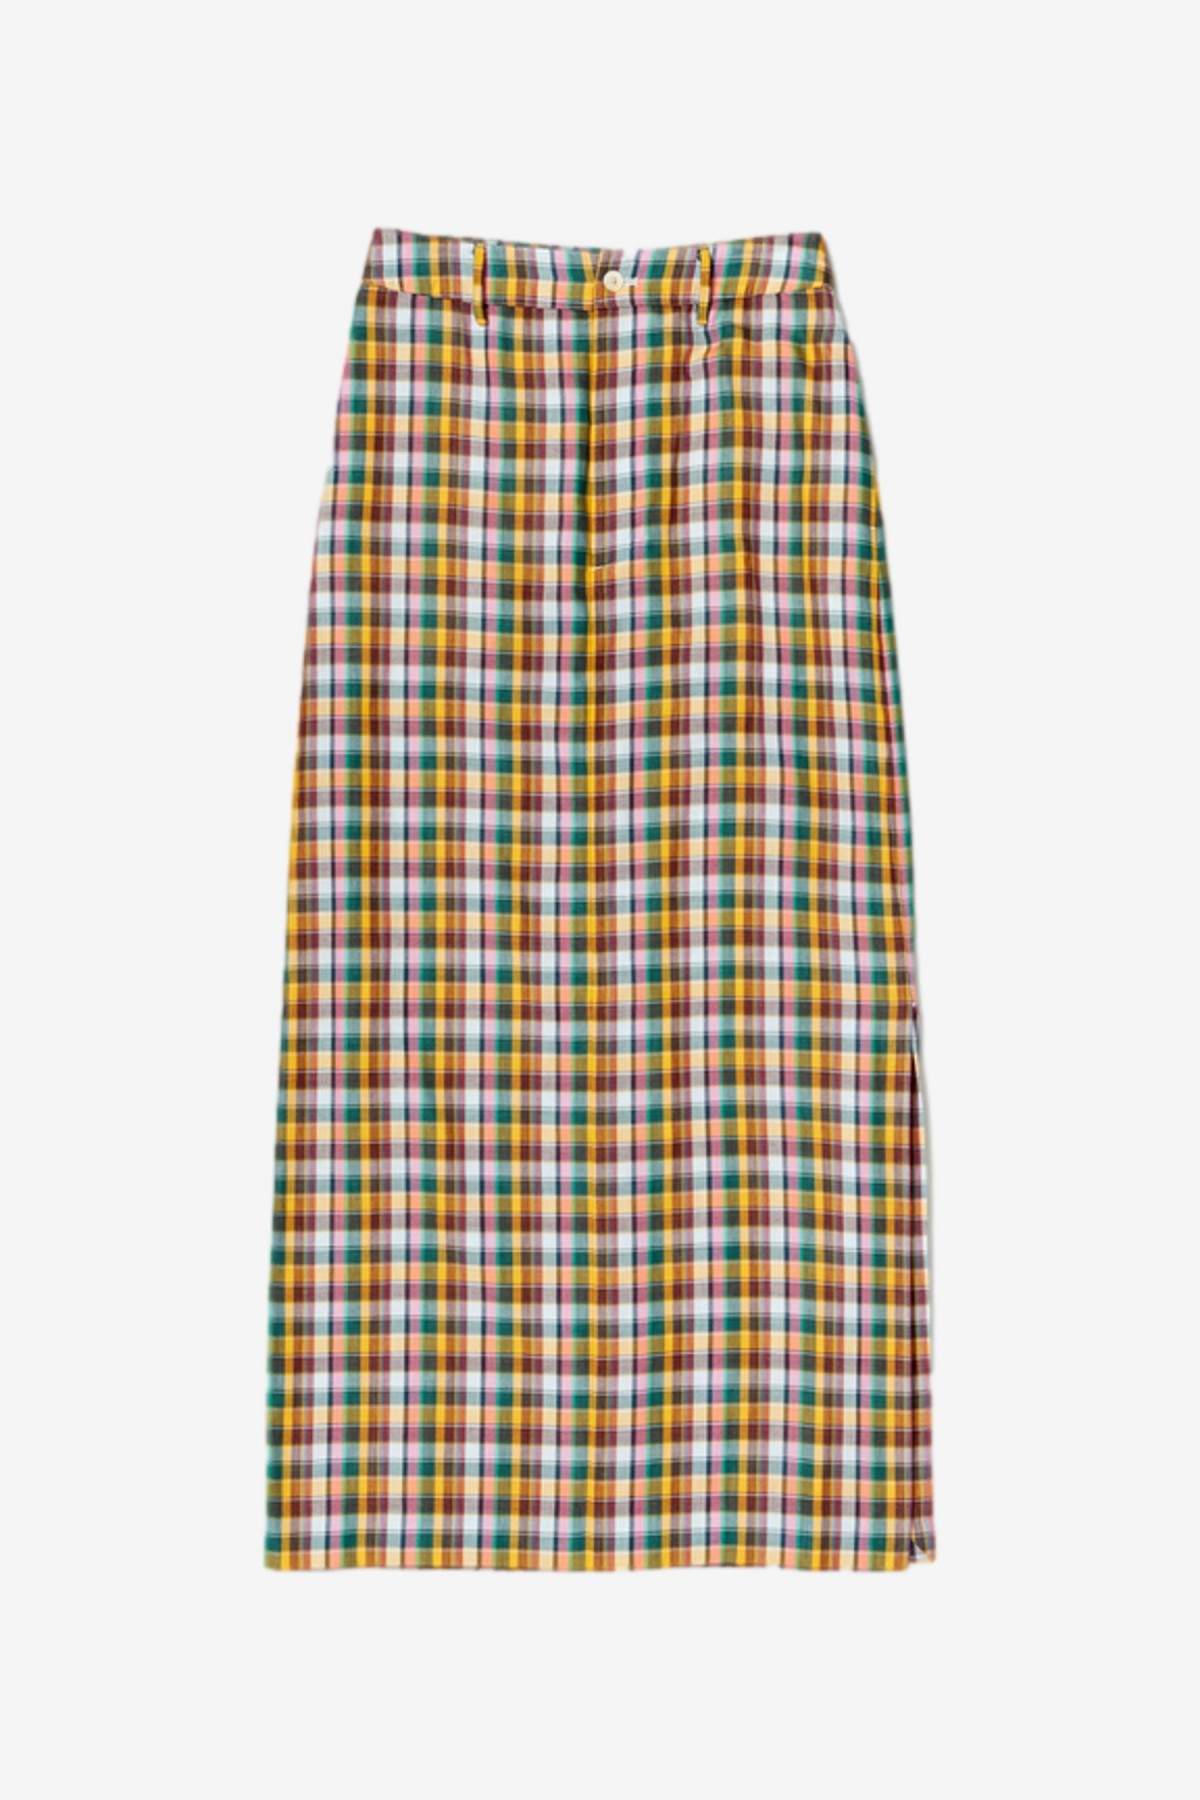 Auralee Giza Light Weight Double-Cloth Skirt in Mix Madras Check